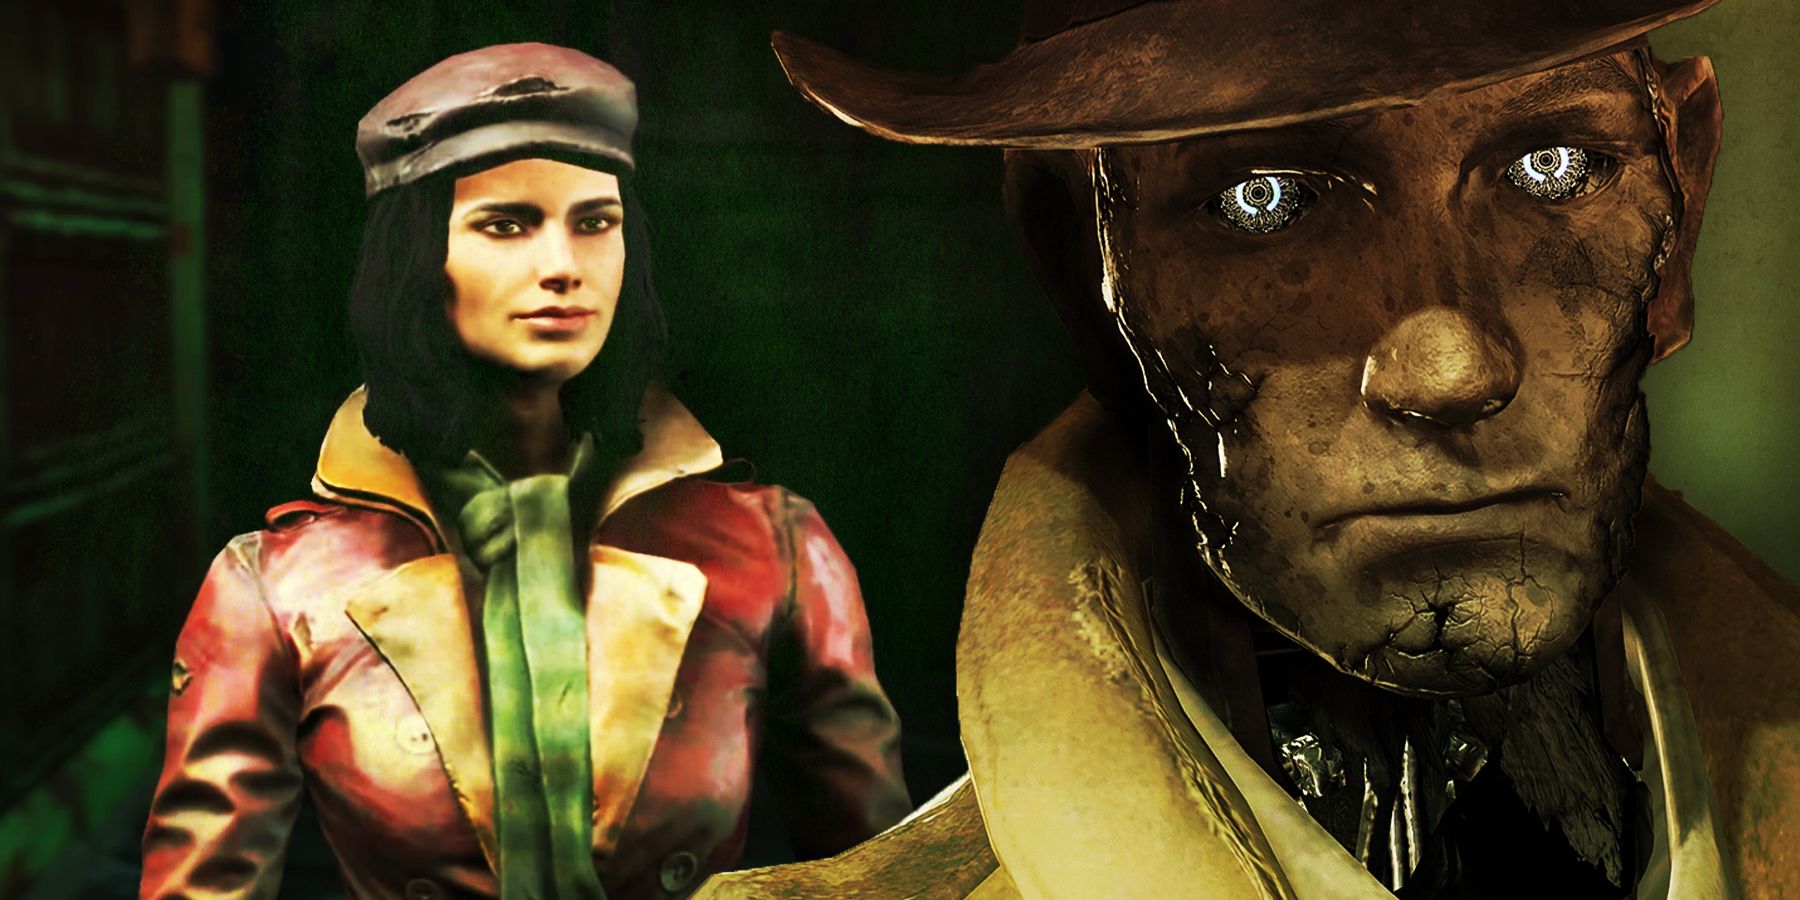 Fallout 4 - Best Companions - Green Man Gaming Blog